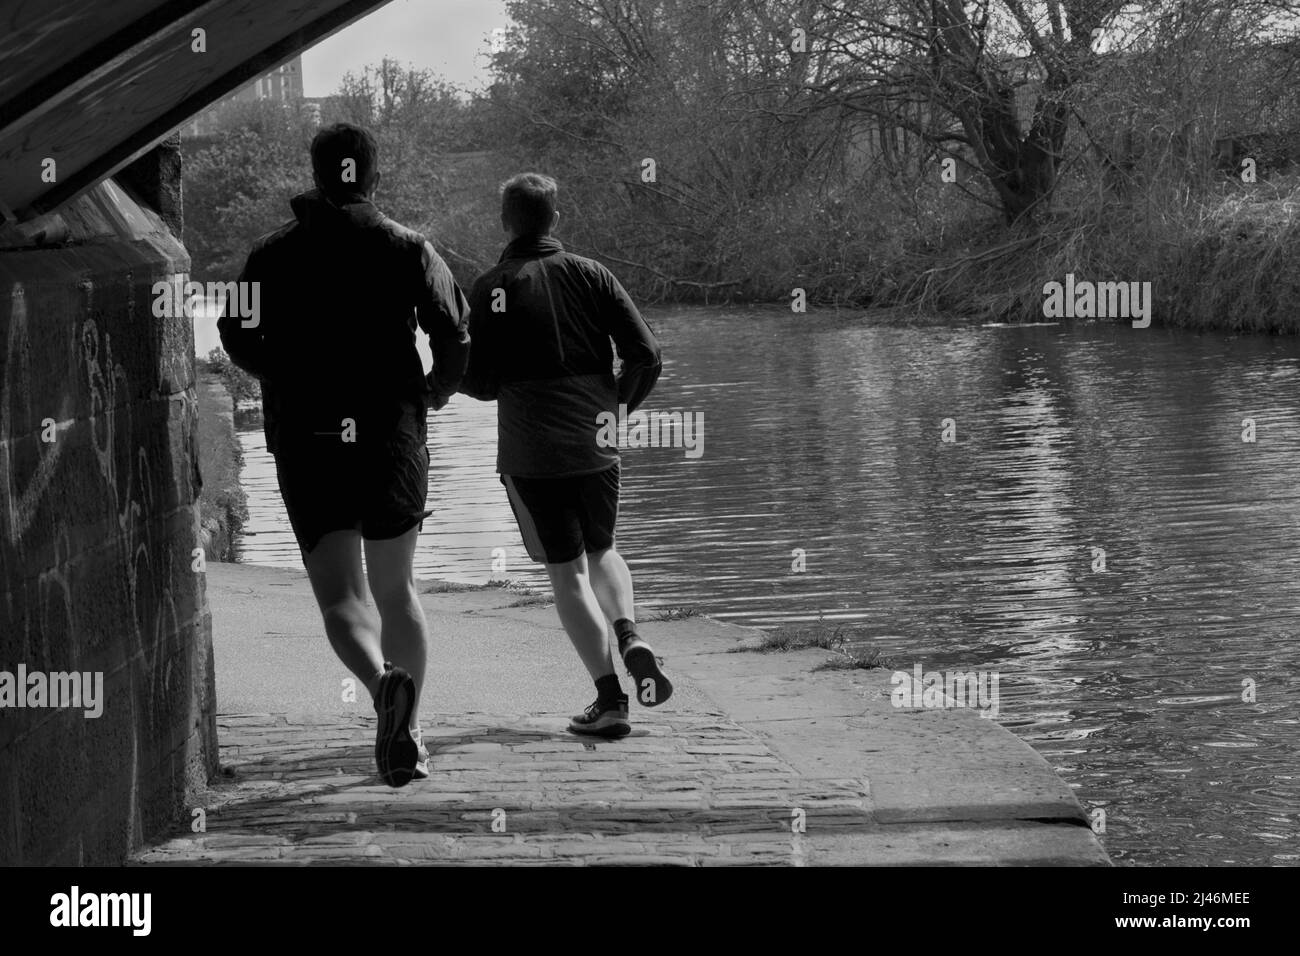 Snapshot of two guys out for a jog along the towpath that parallels the Leeds and Liverpool Canal in Leeds, West Yorkshire, England, UK. Stock Photo